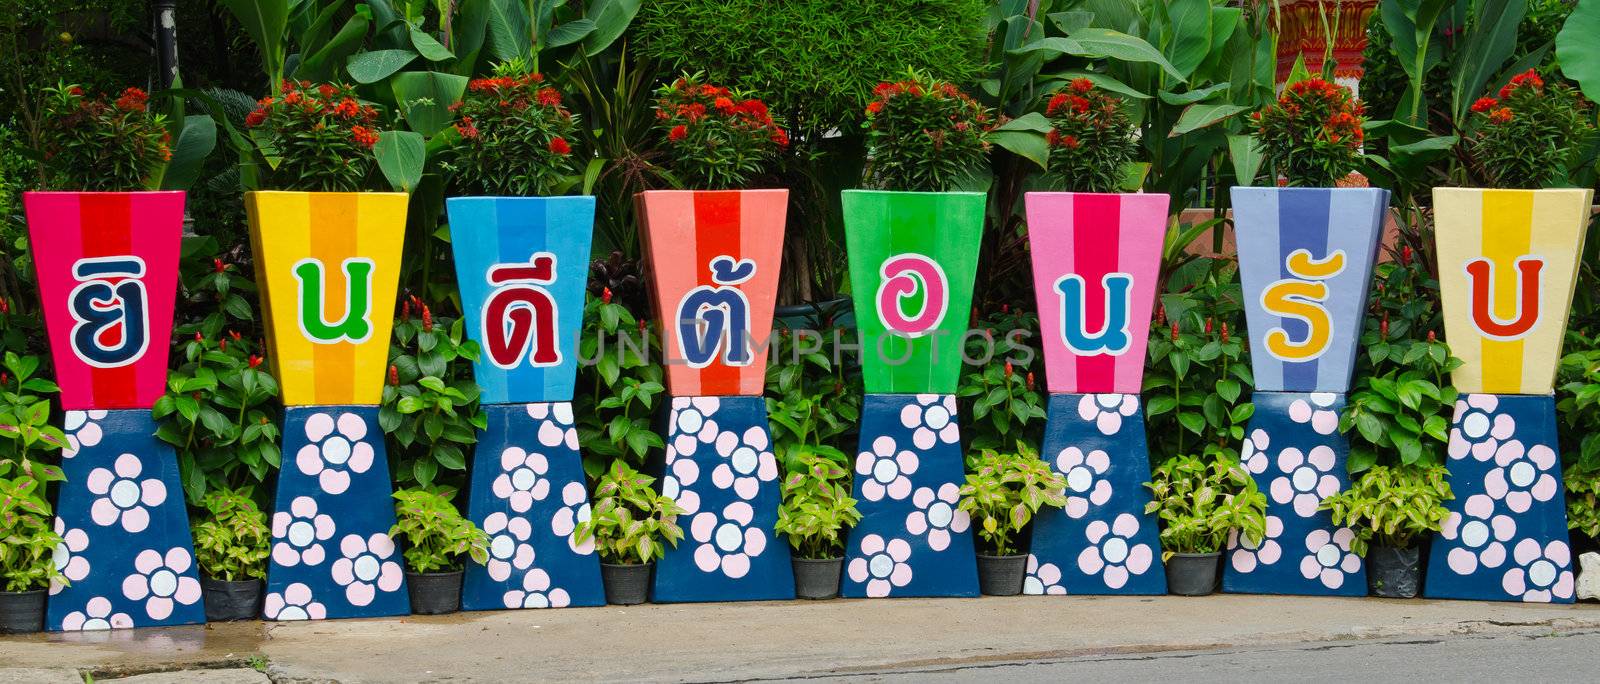 welcome sign word on colorful flower pots